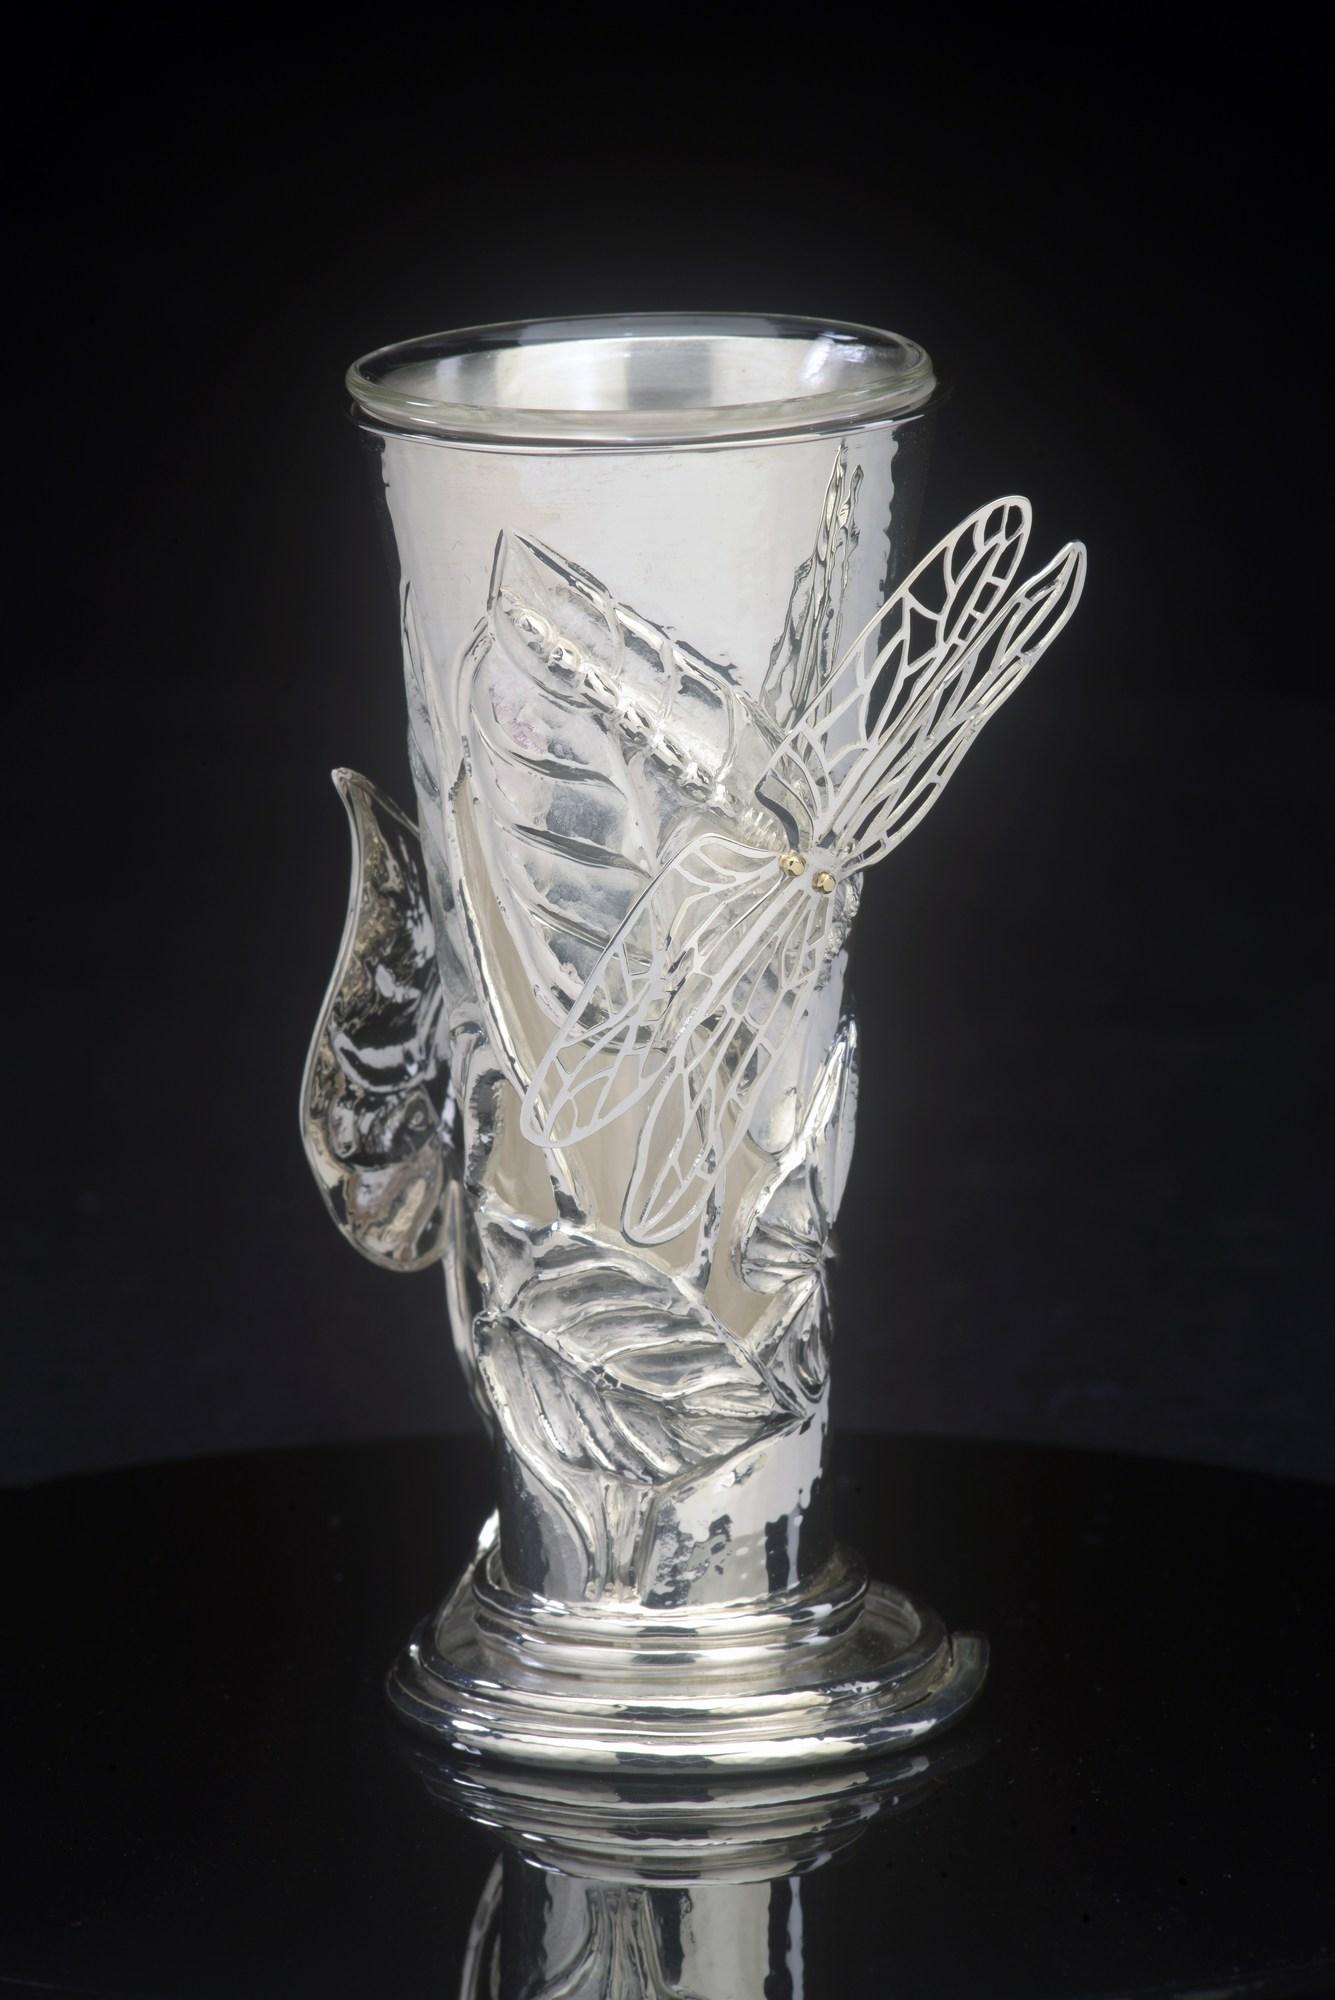 Genevieve E. Flynn Figurative Sculpture - Taro Leaves and Dragonfly Bud Vase